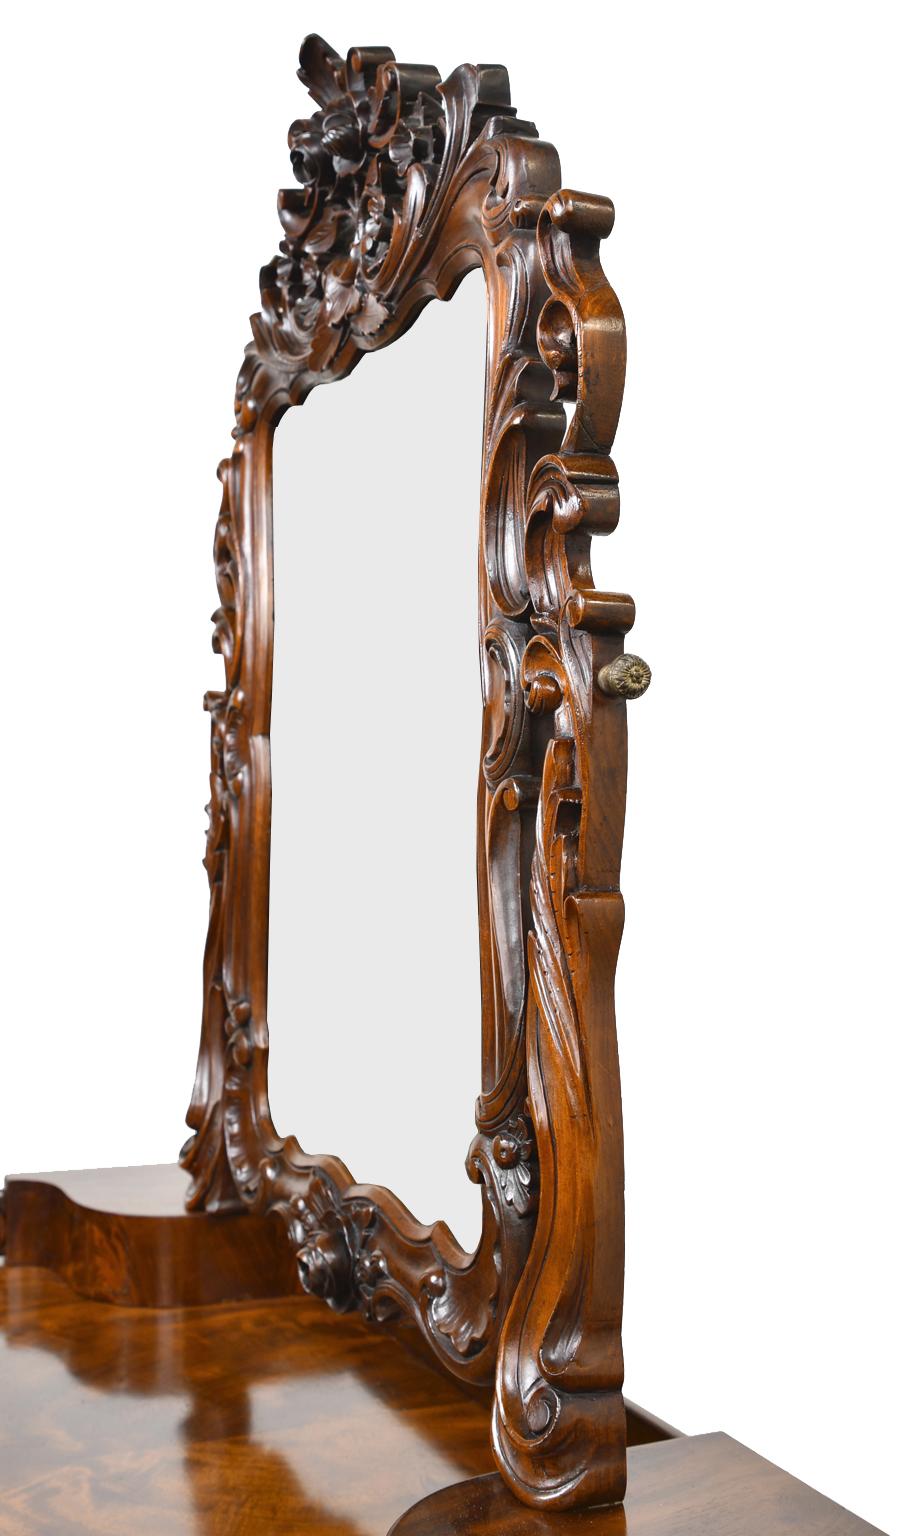 Antique Karl Johan Dressing Table/Vanity & Mirror in Mahogany w/ Rococo Carvings For Sale 2